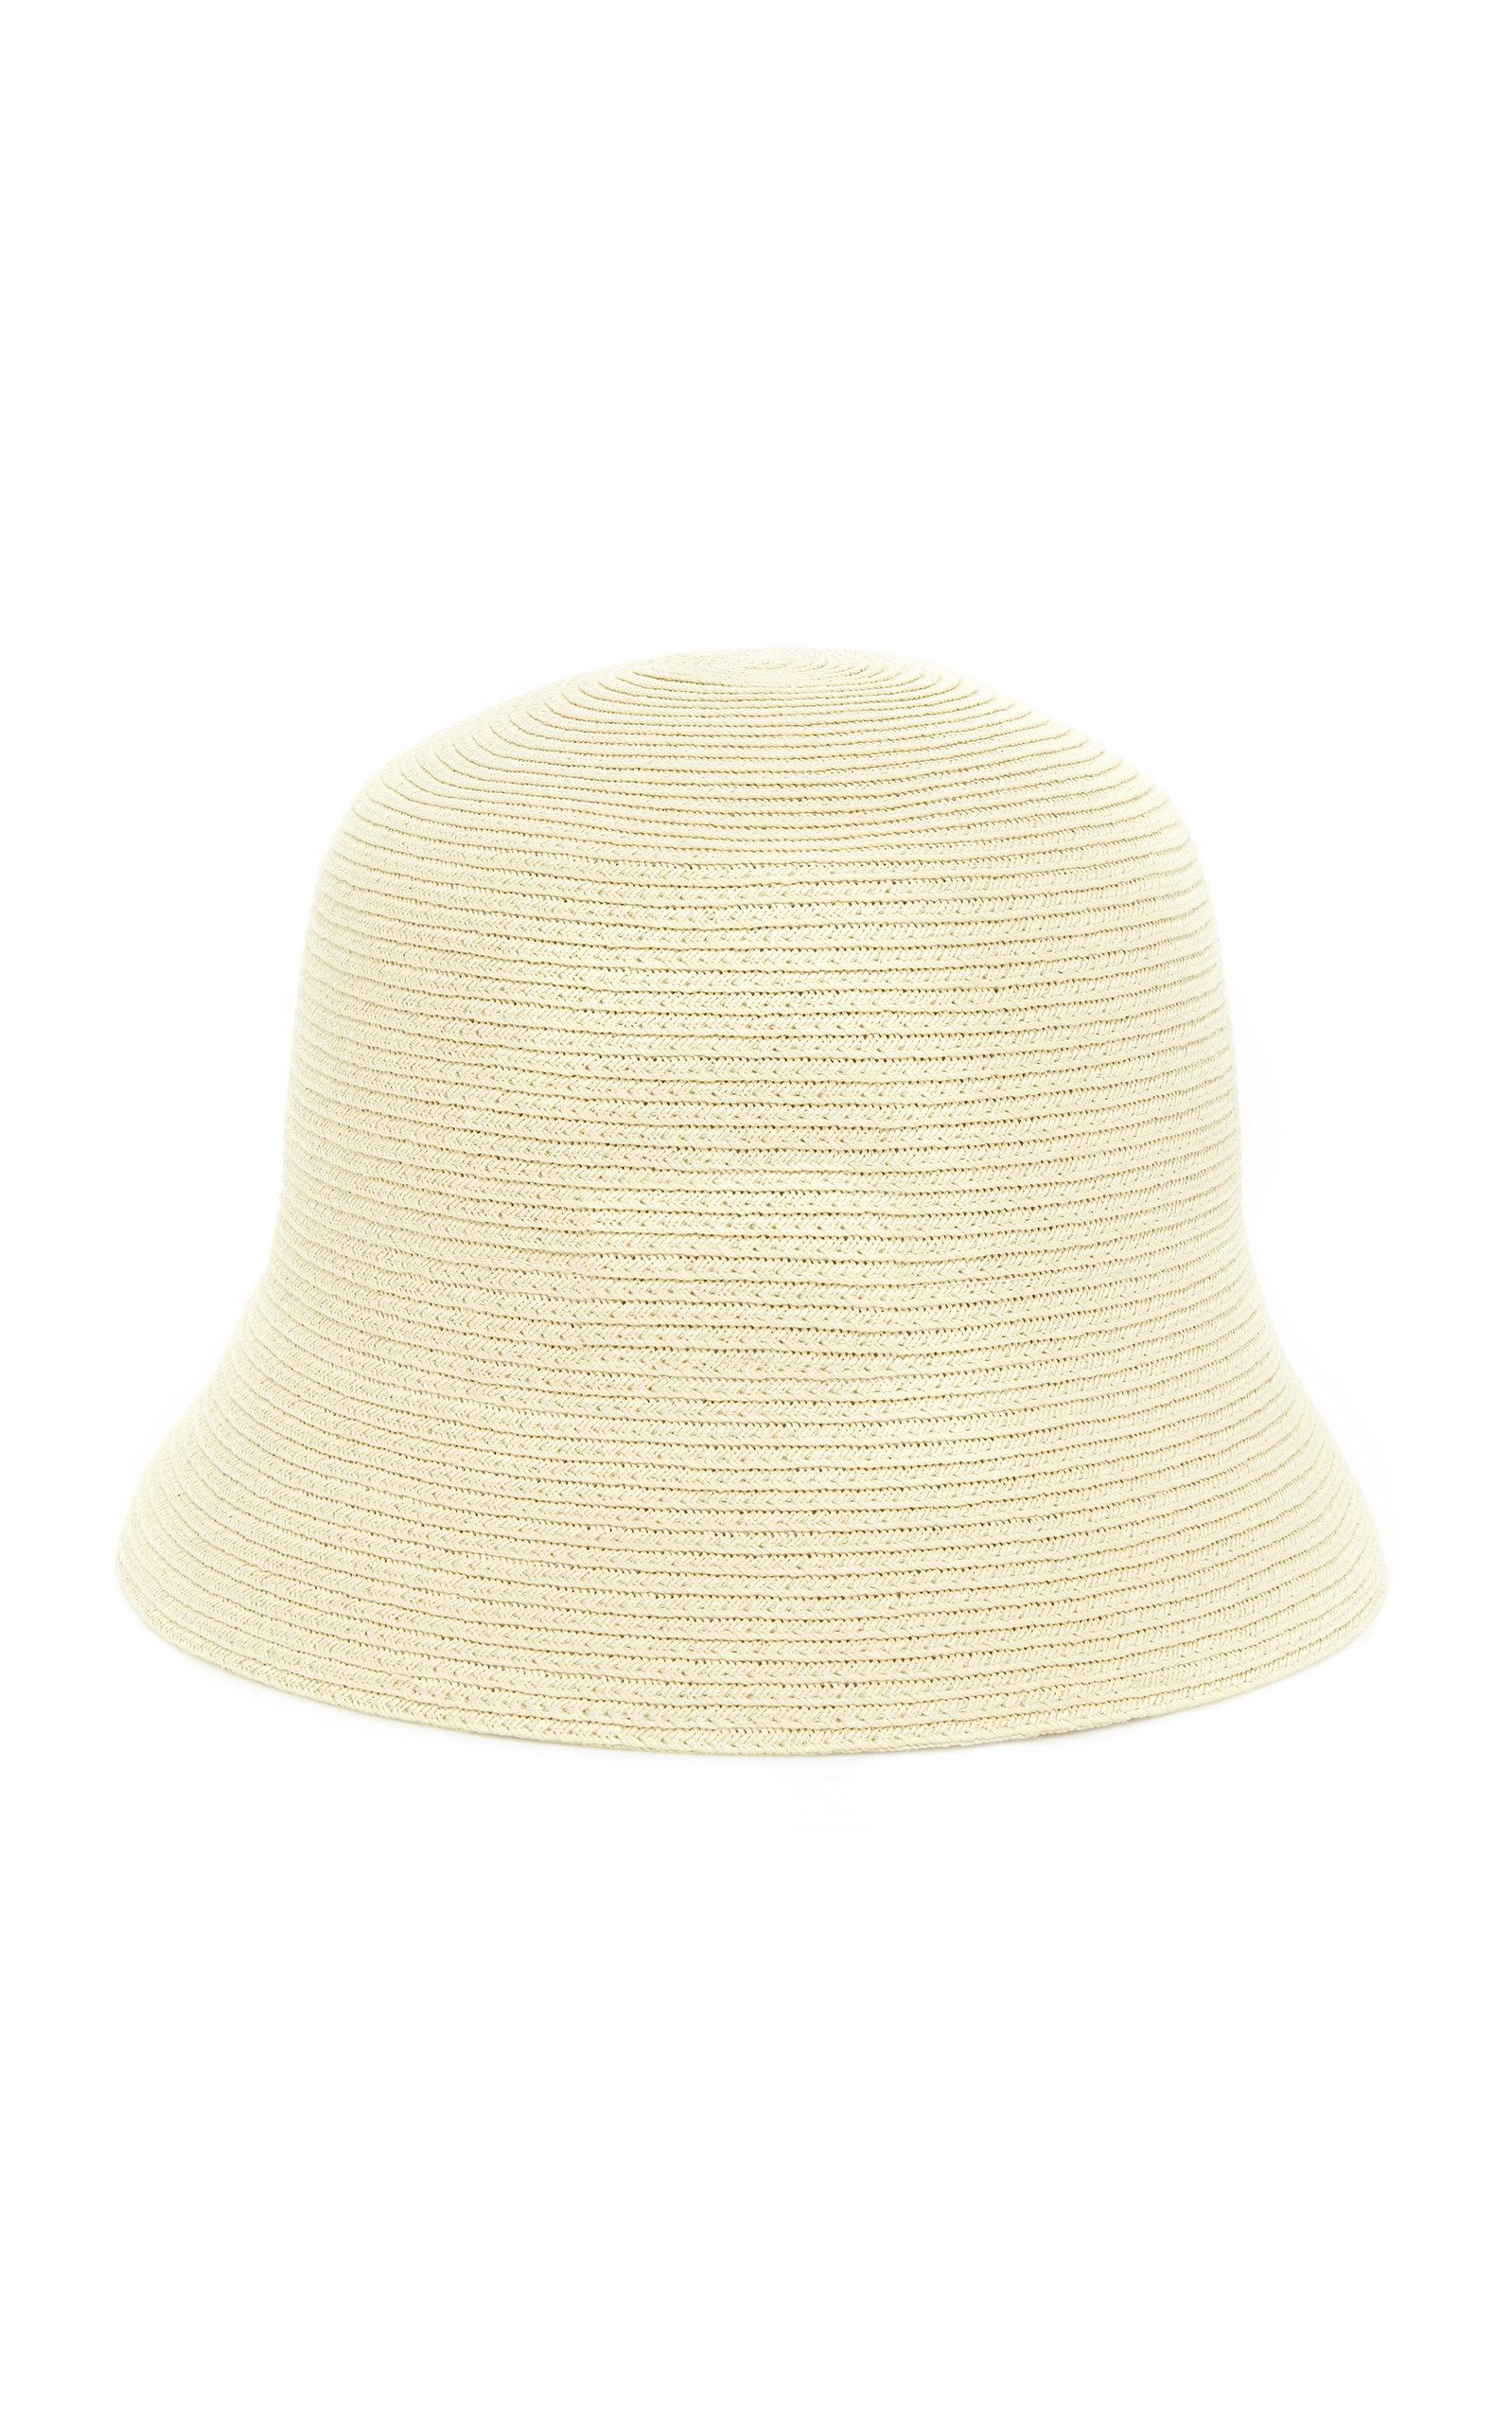 Jacquemus Le Bob Manosque Woven Bucket Hat in Natural - Lyst